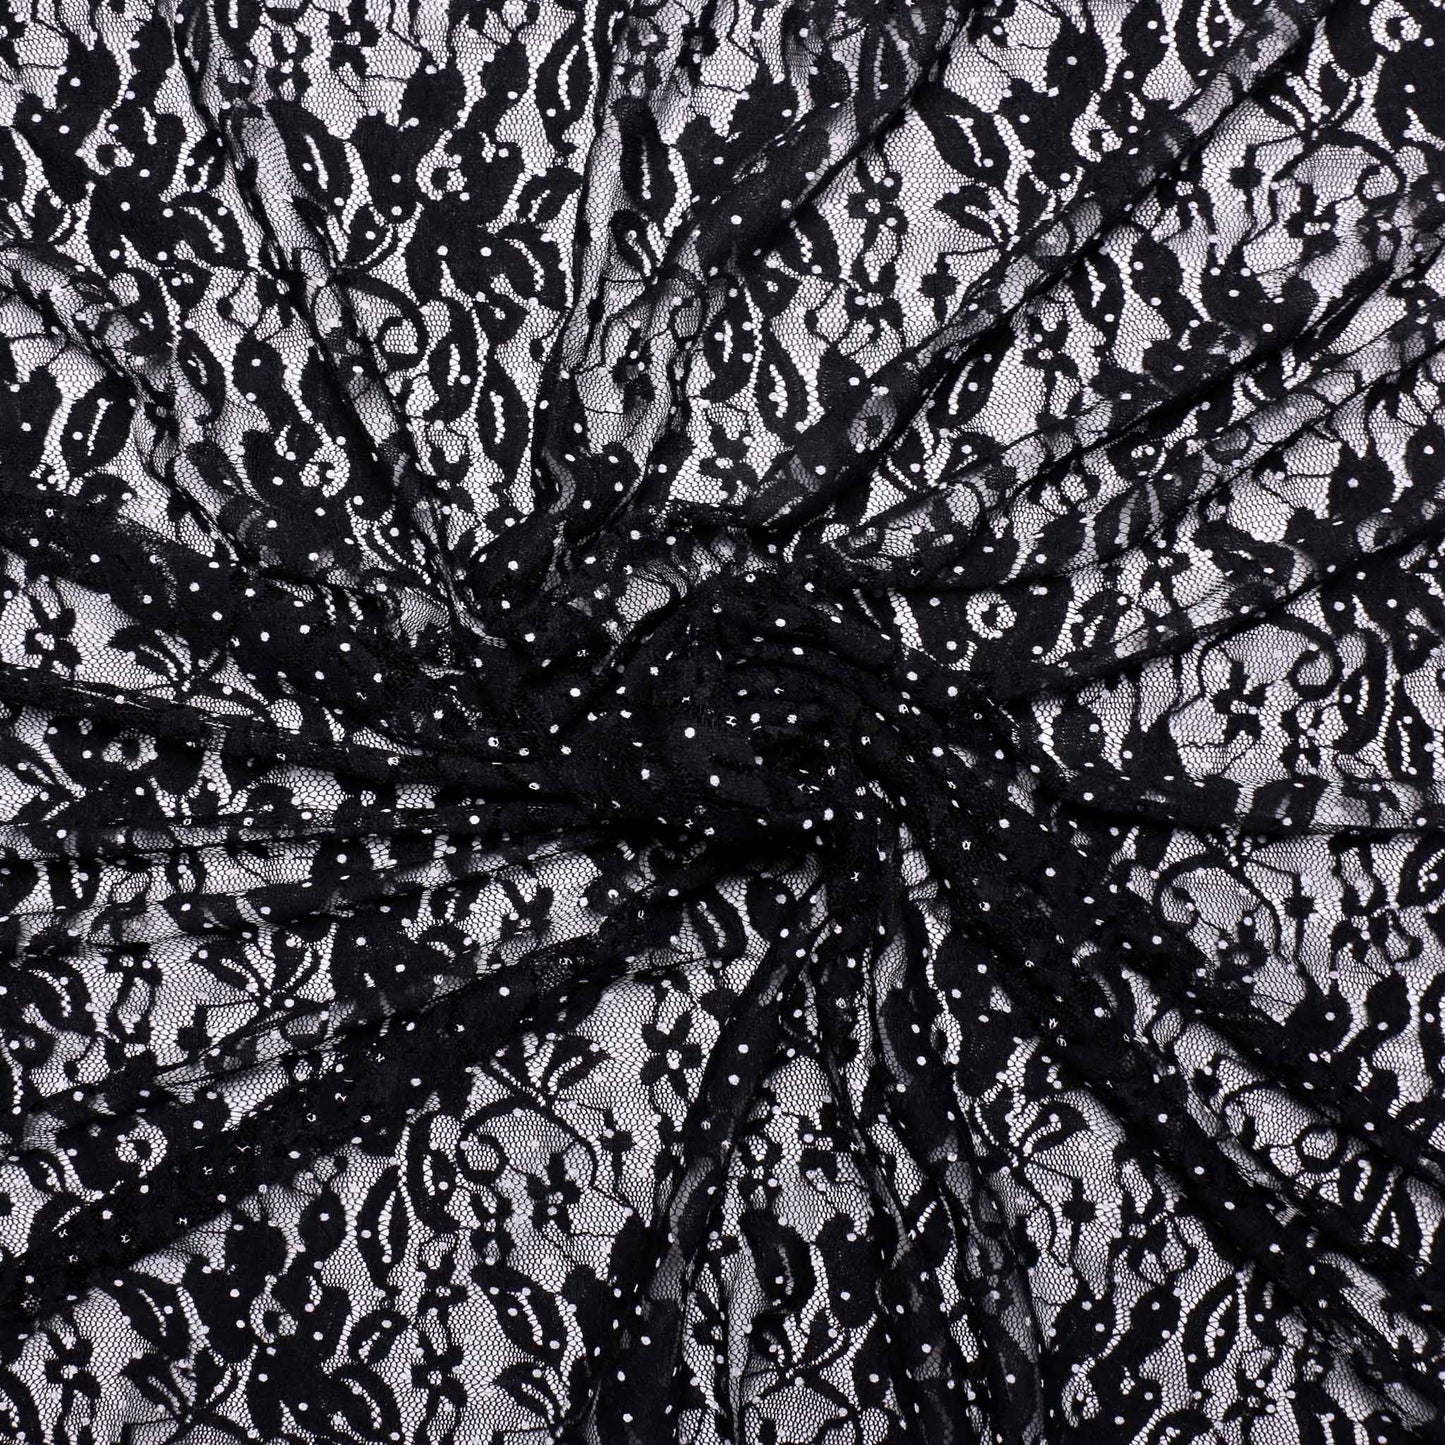 floral black dressmaking lace fabric with white polka dot design